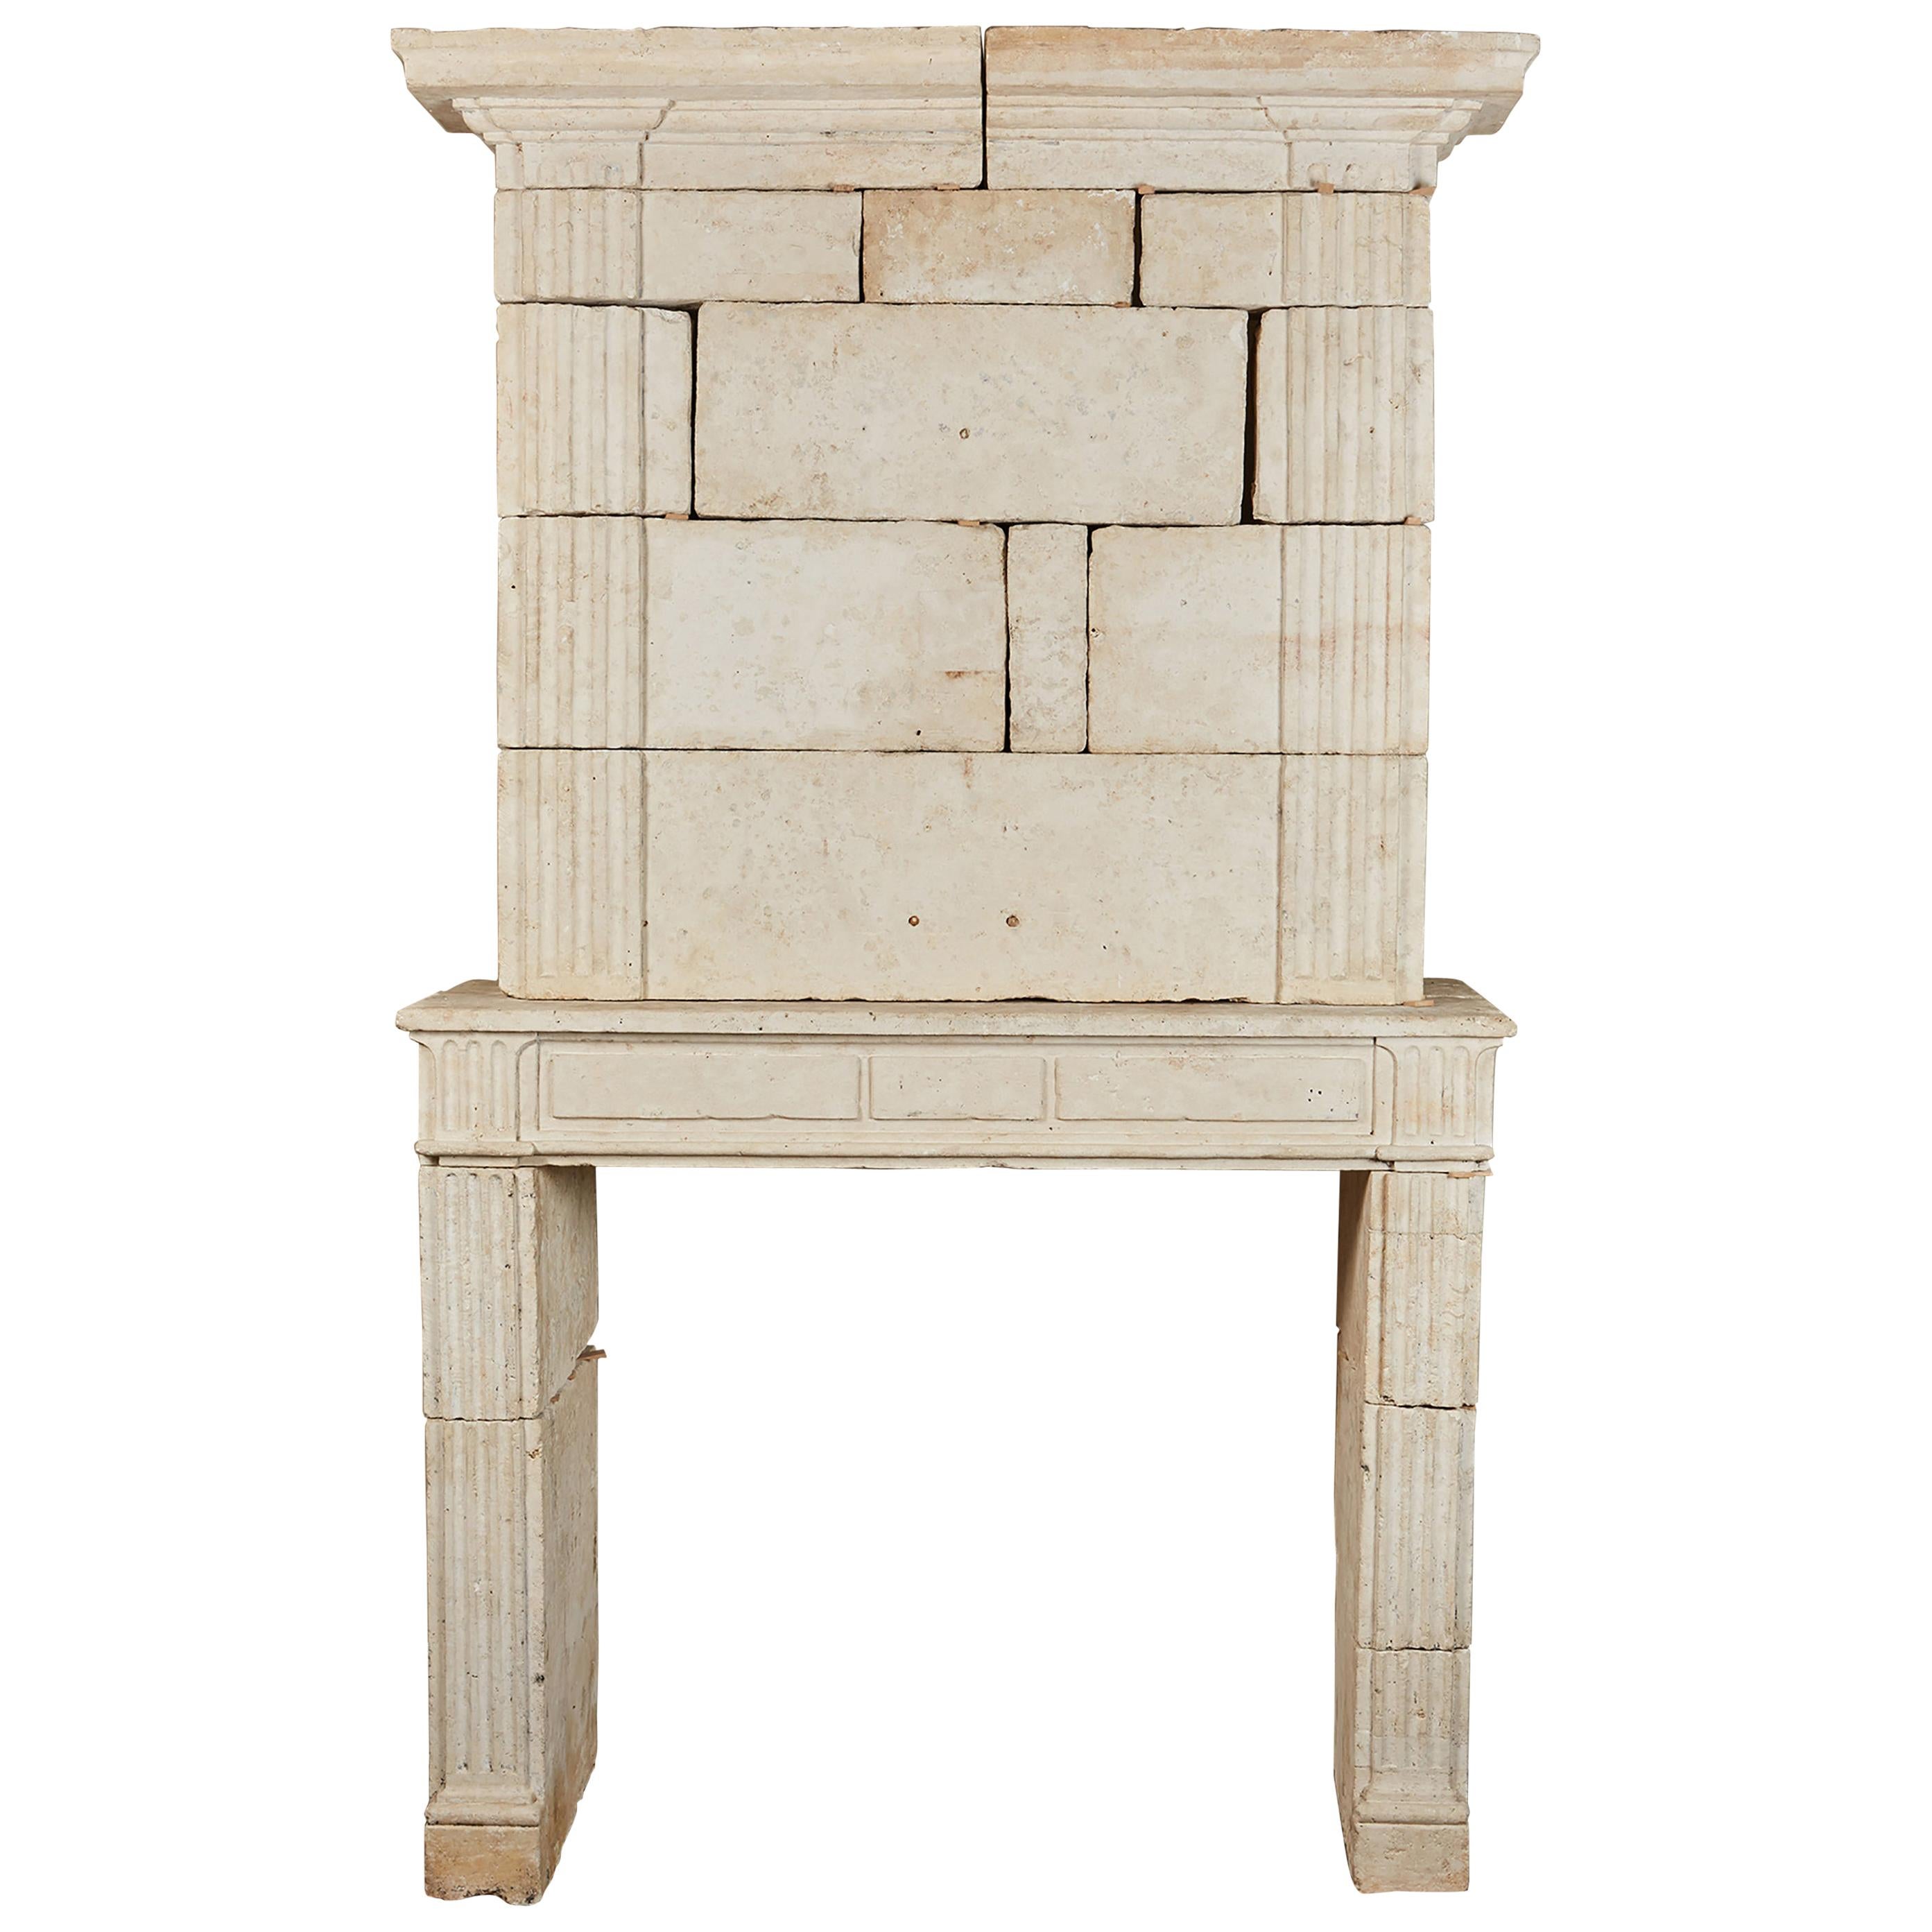 18th Century Neoclassical French Limestone Fireplace Surround